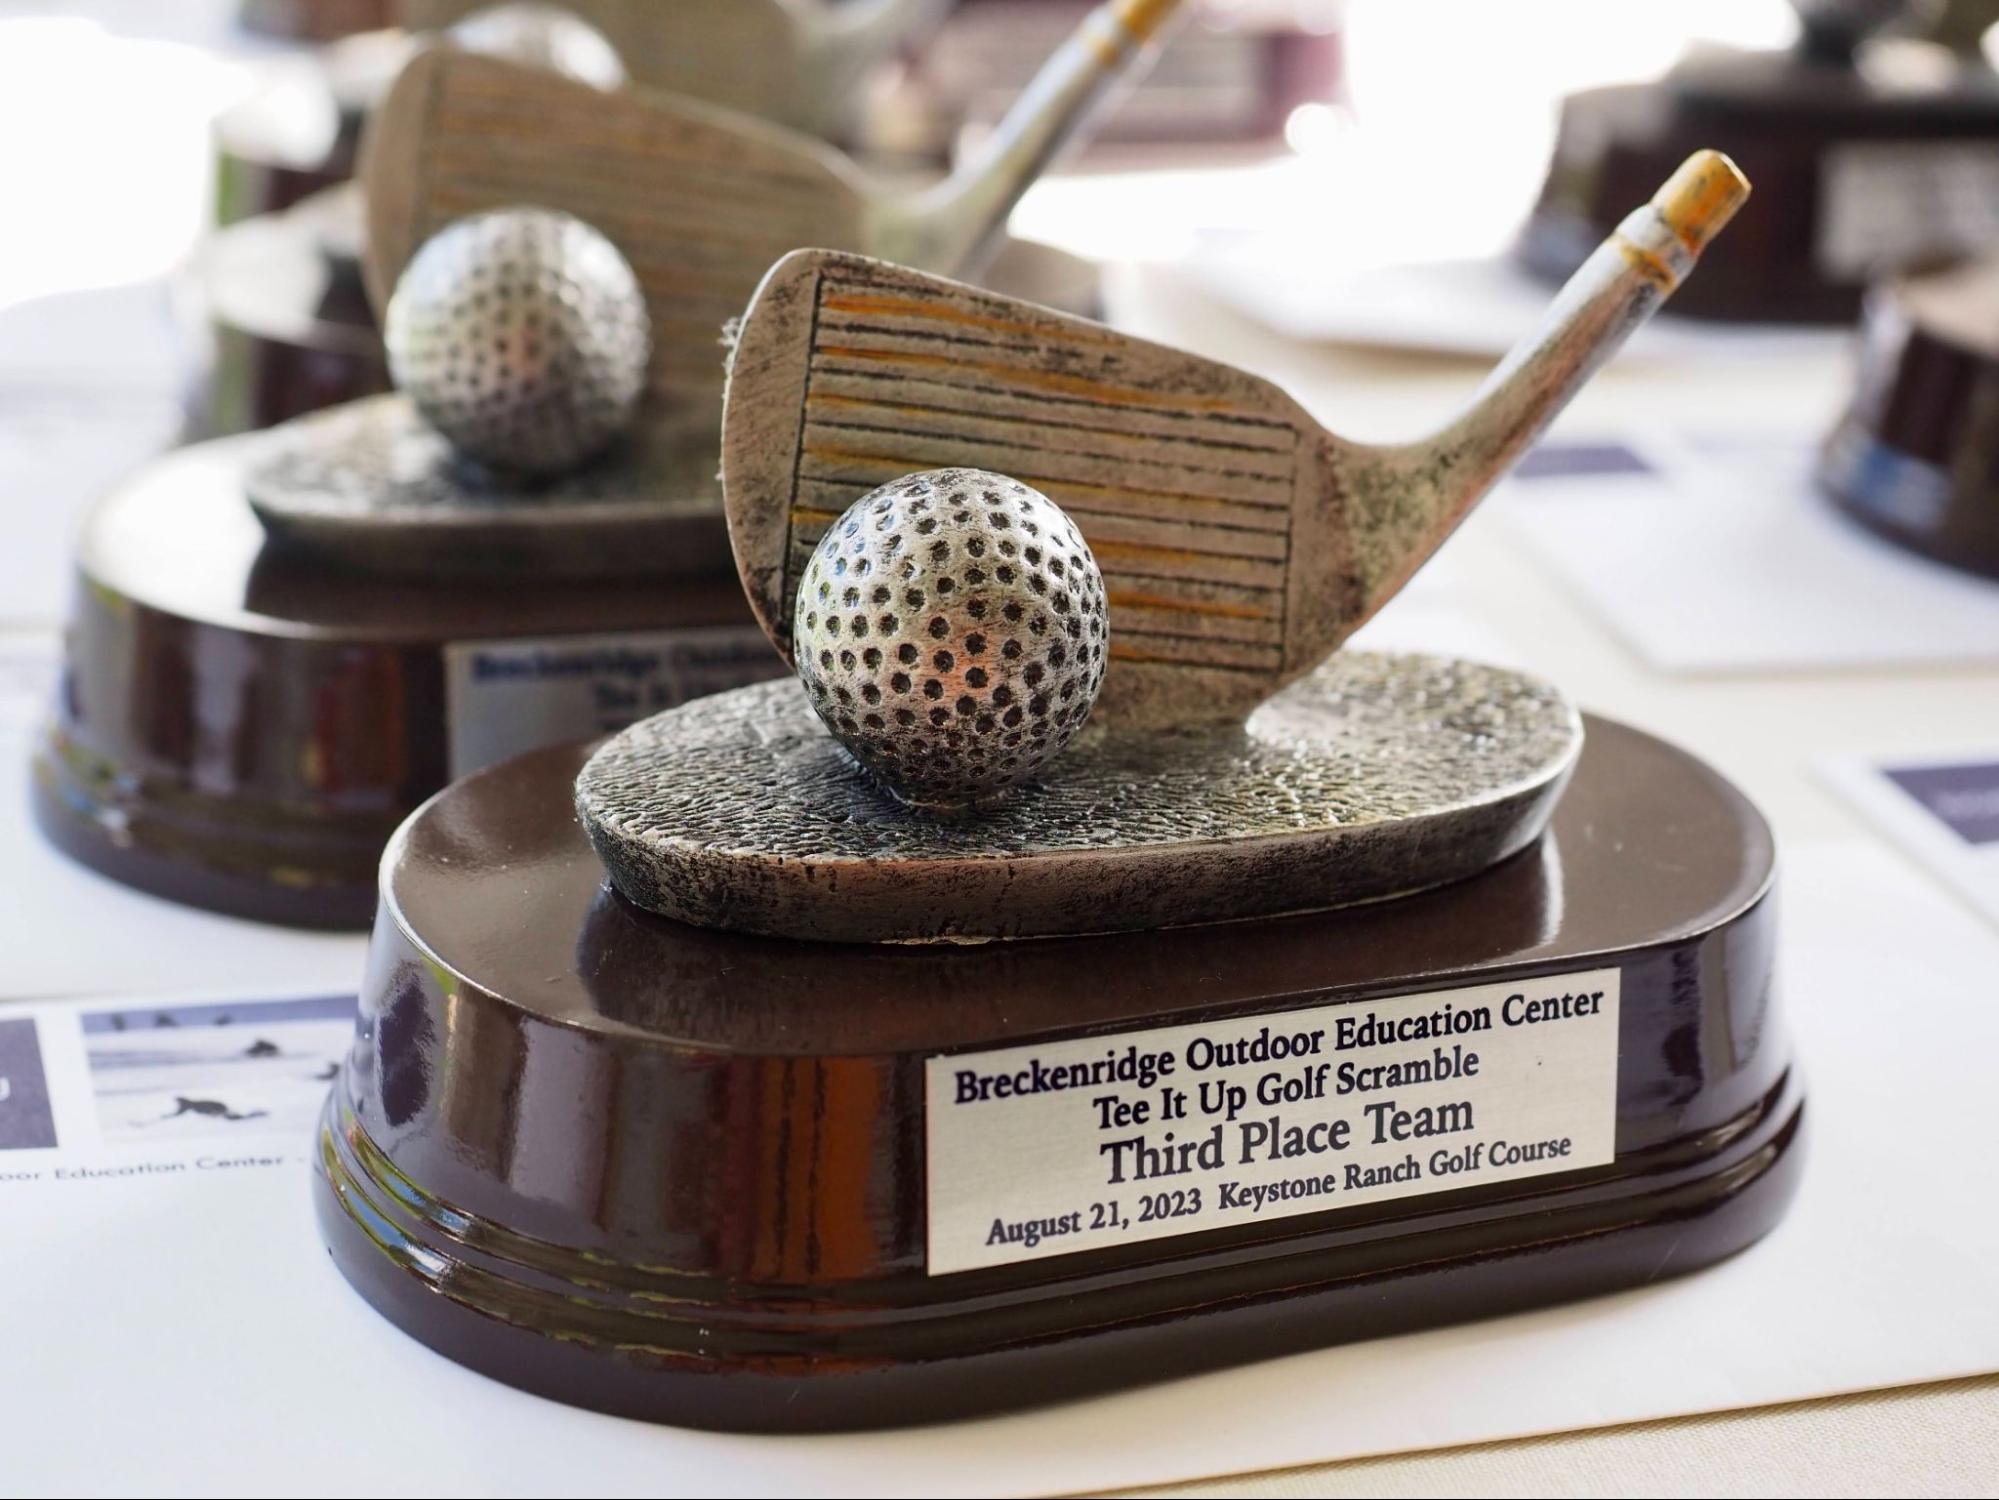 This year we added trophies to the prize for all of our competition winners. Trophies were given out for First Place Team, Second Place Team, Third Place Team, Men’s Longest Drive, Women’s Longest Drive, Men’s Closest to the Pin, Women’s Closest to the Pin, and Longest Putt.